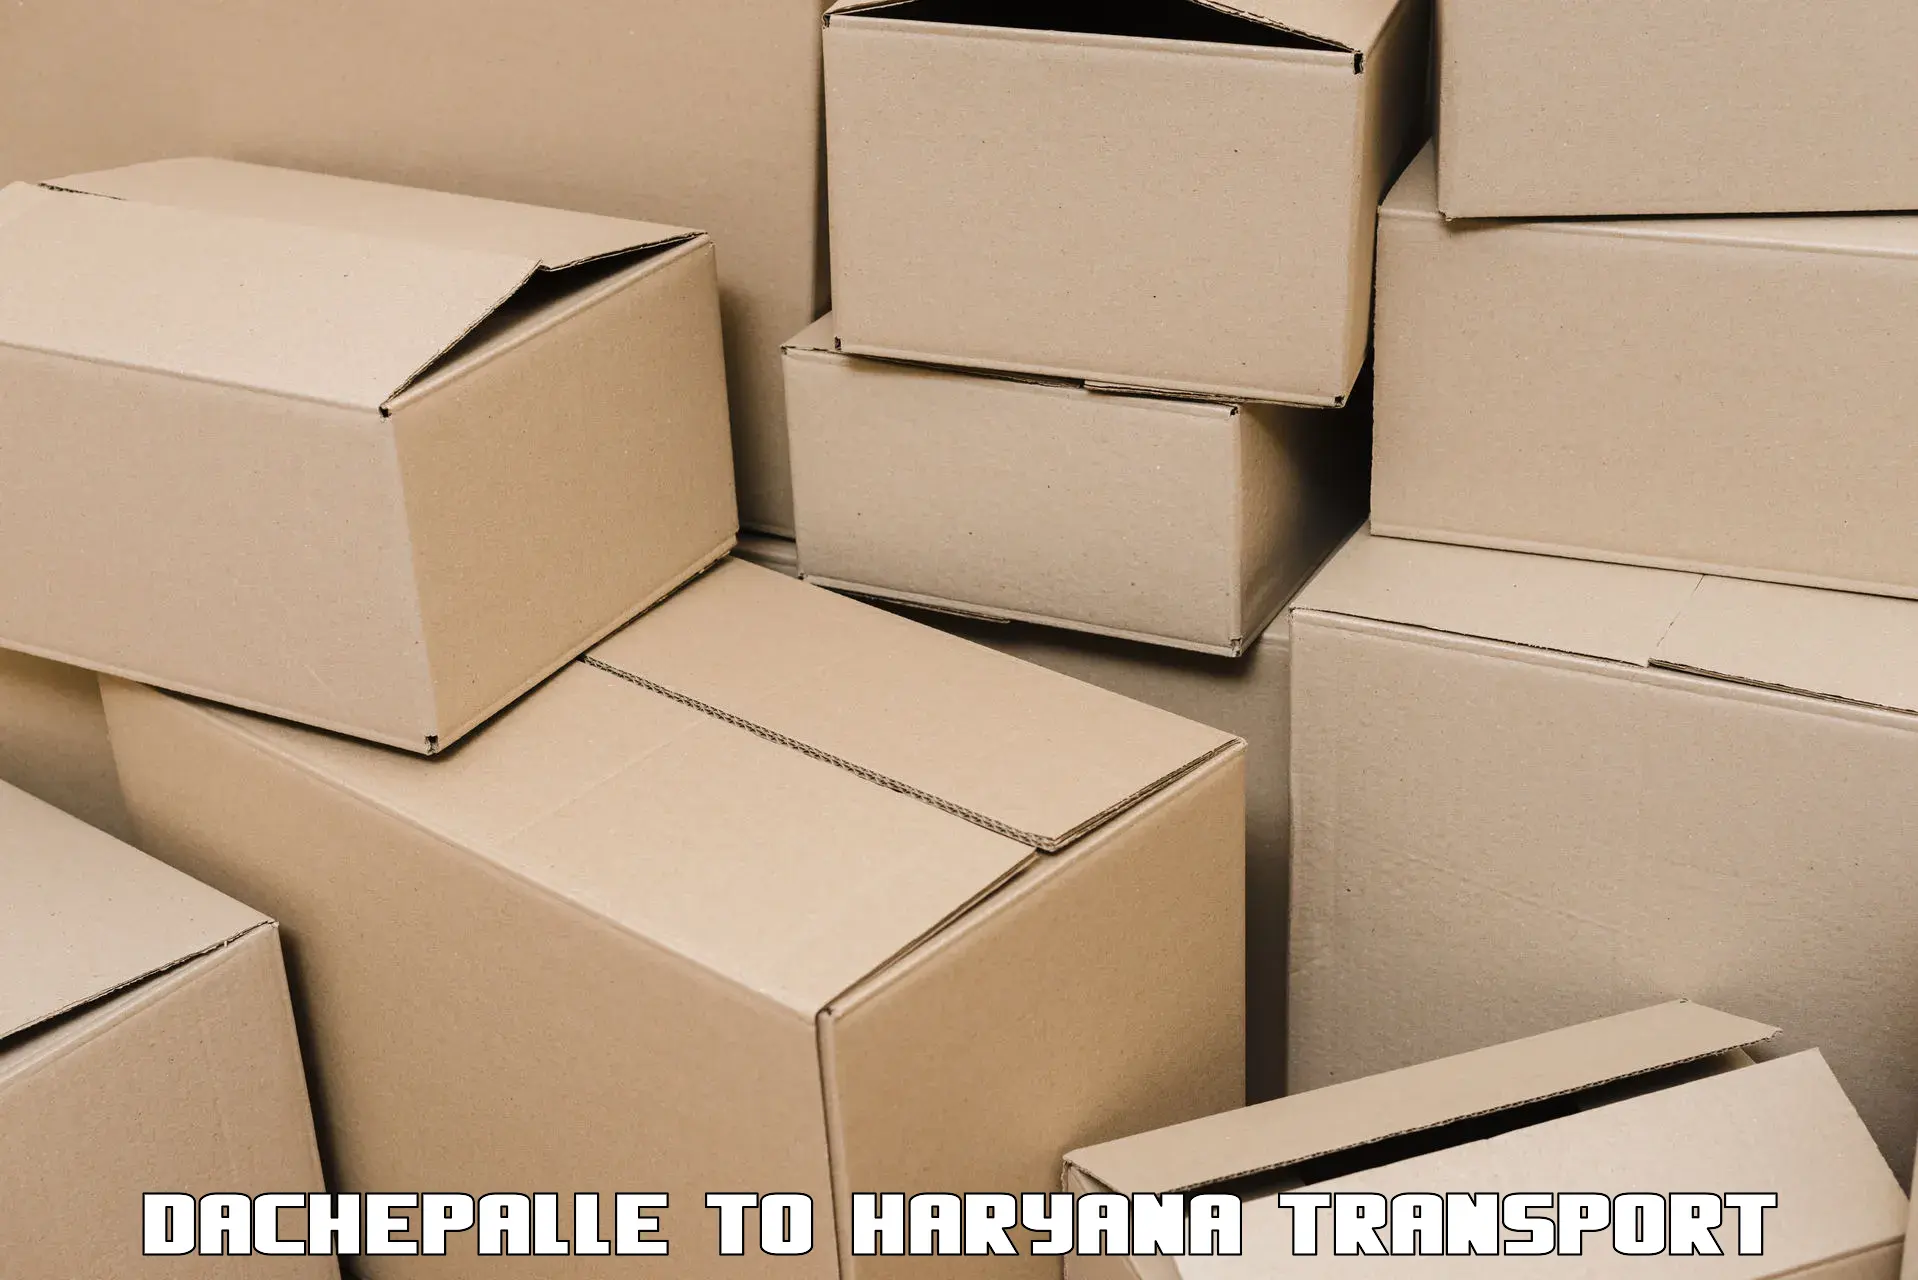 Daily parcel service transport Dachepalle to NCR Haryana